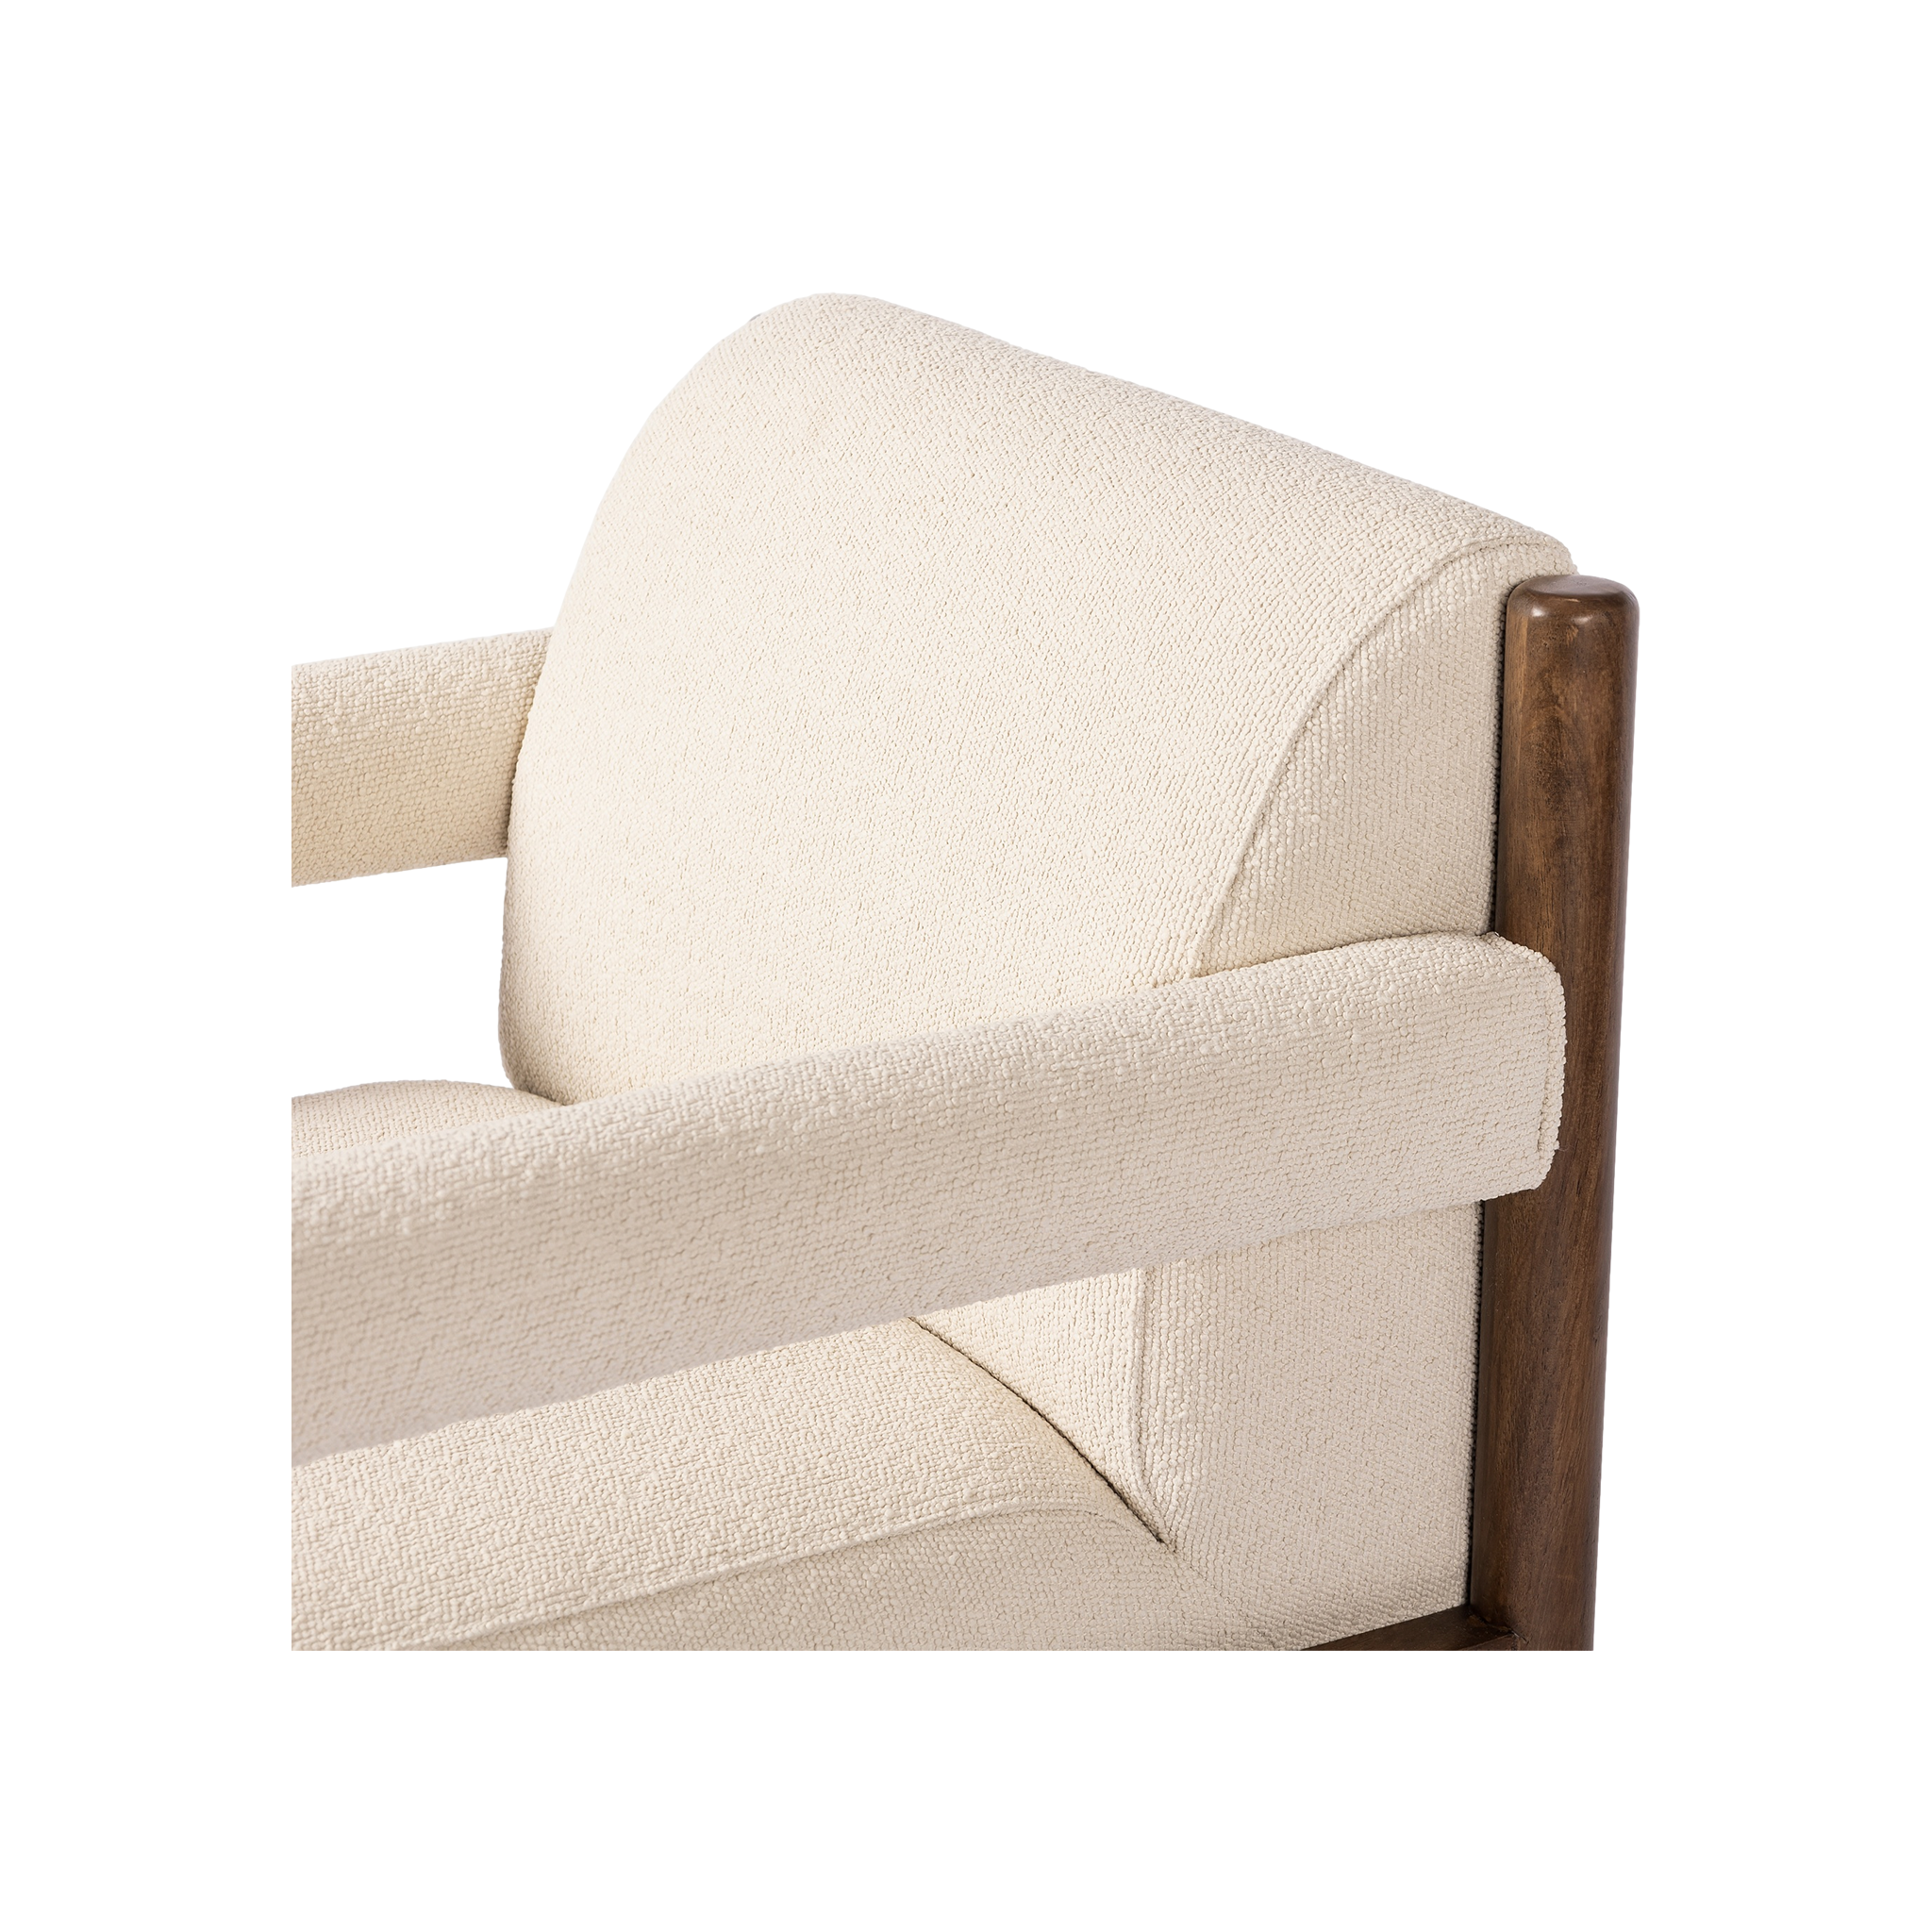 Redman Dining Armchair in Taupe